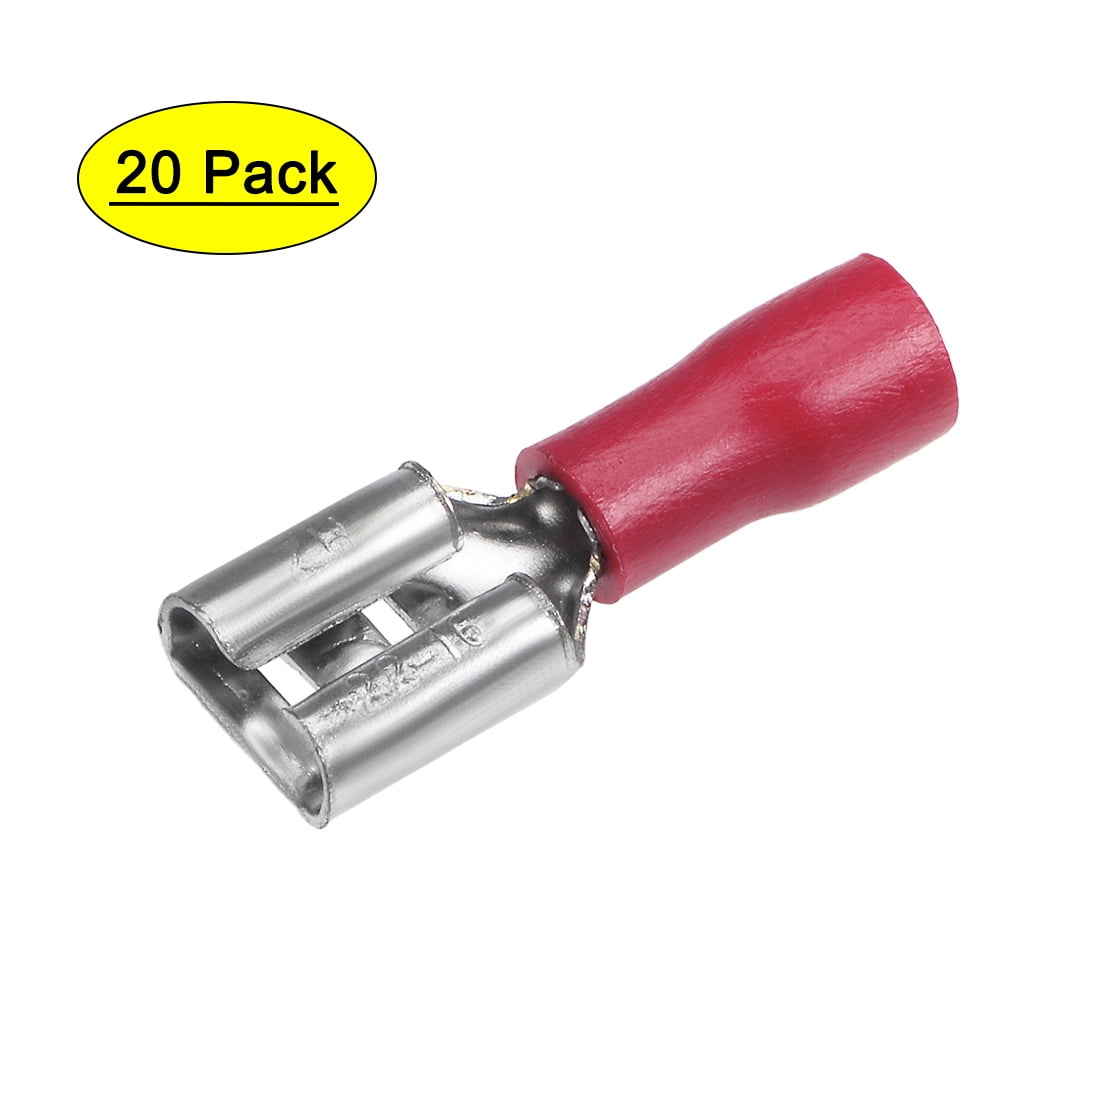 RED insulated 22-18awg crimp Ring Terminal for #10 screws & studs